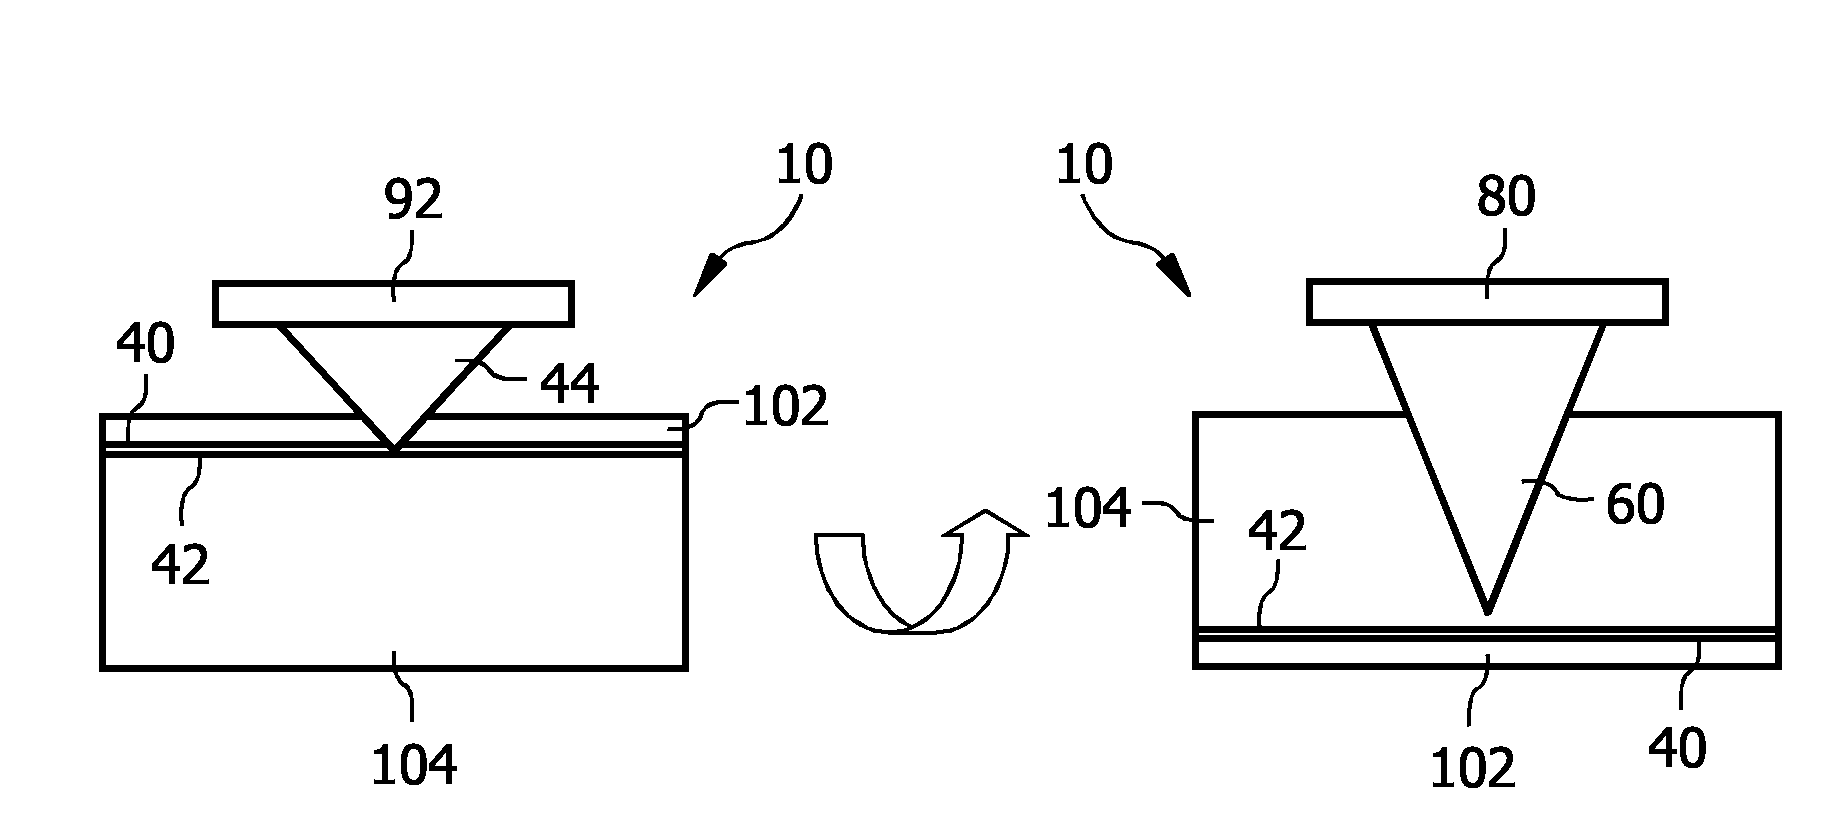 Method of Writing on an Optical Recording Medium, Optical Recording Medium, and Method of Manufacturing an Optical Recording Medium